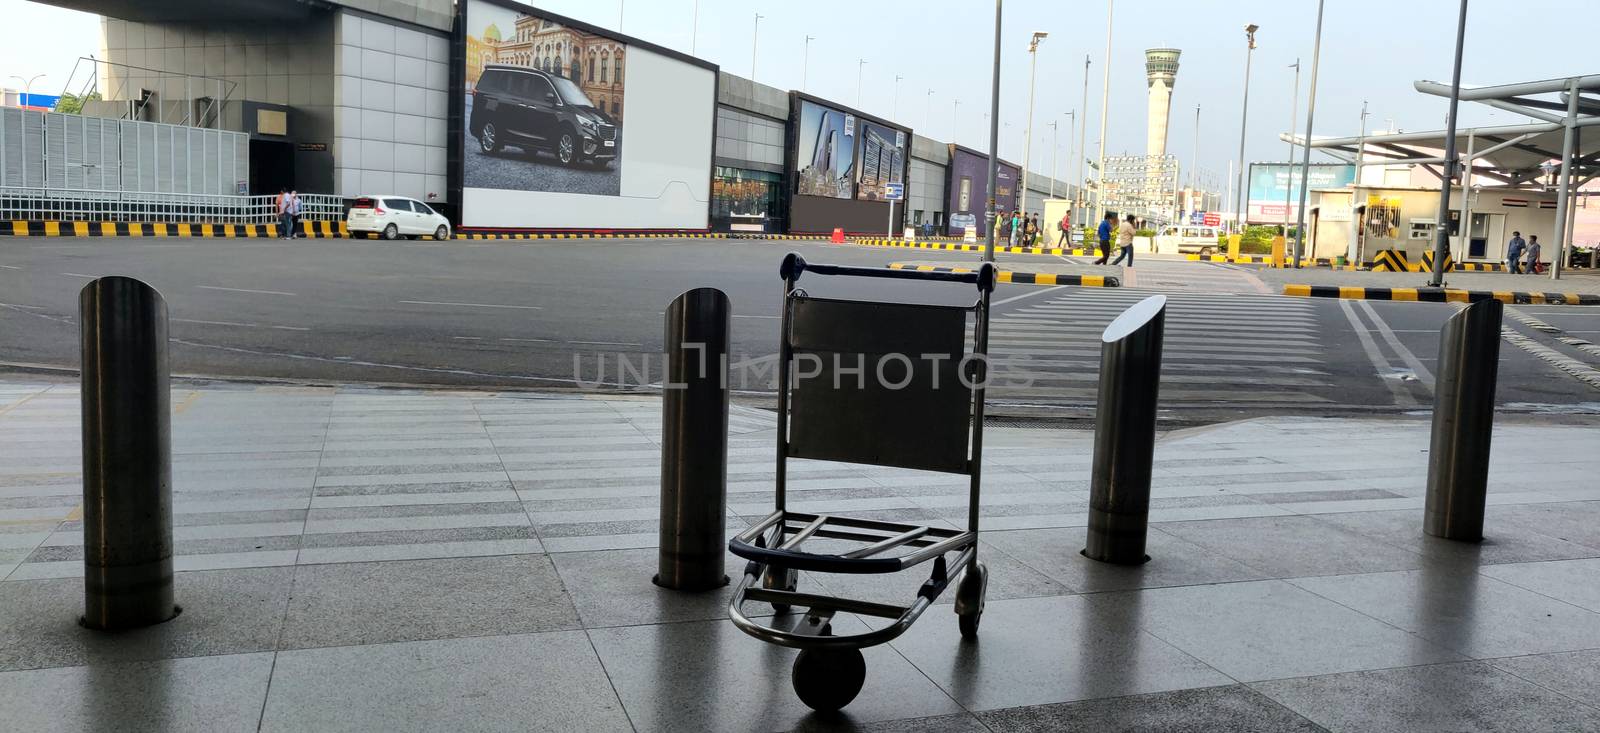 Empty bag trolley at International airport of Delhi in June 2020 by mshivangi92